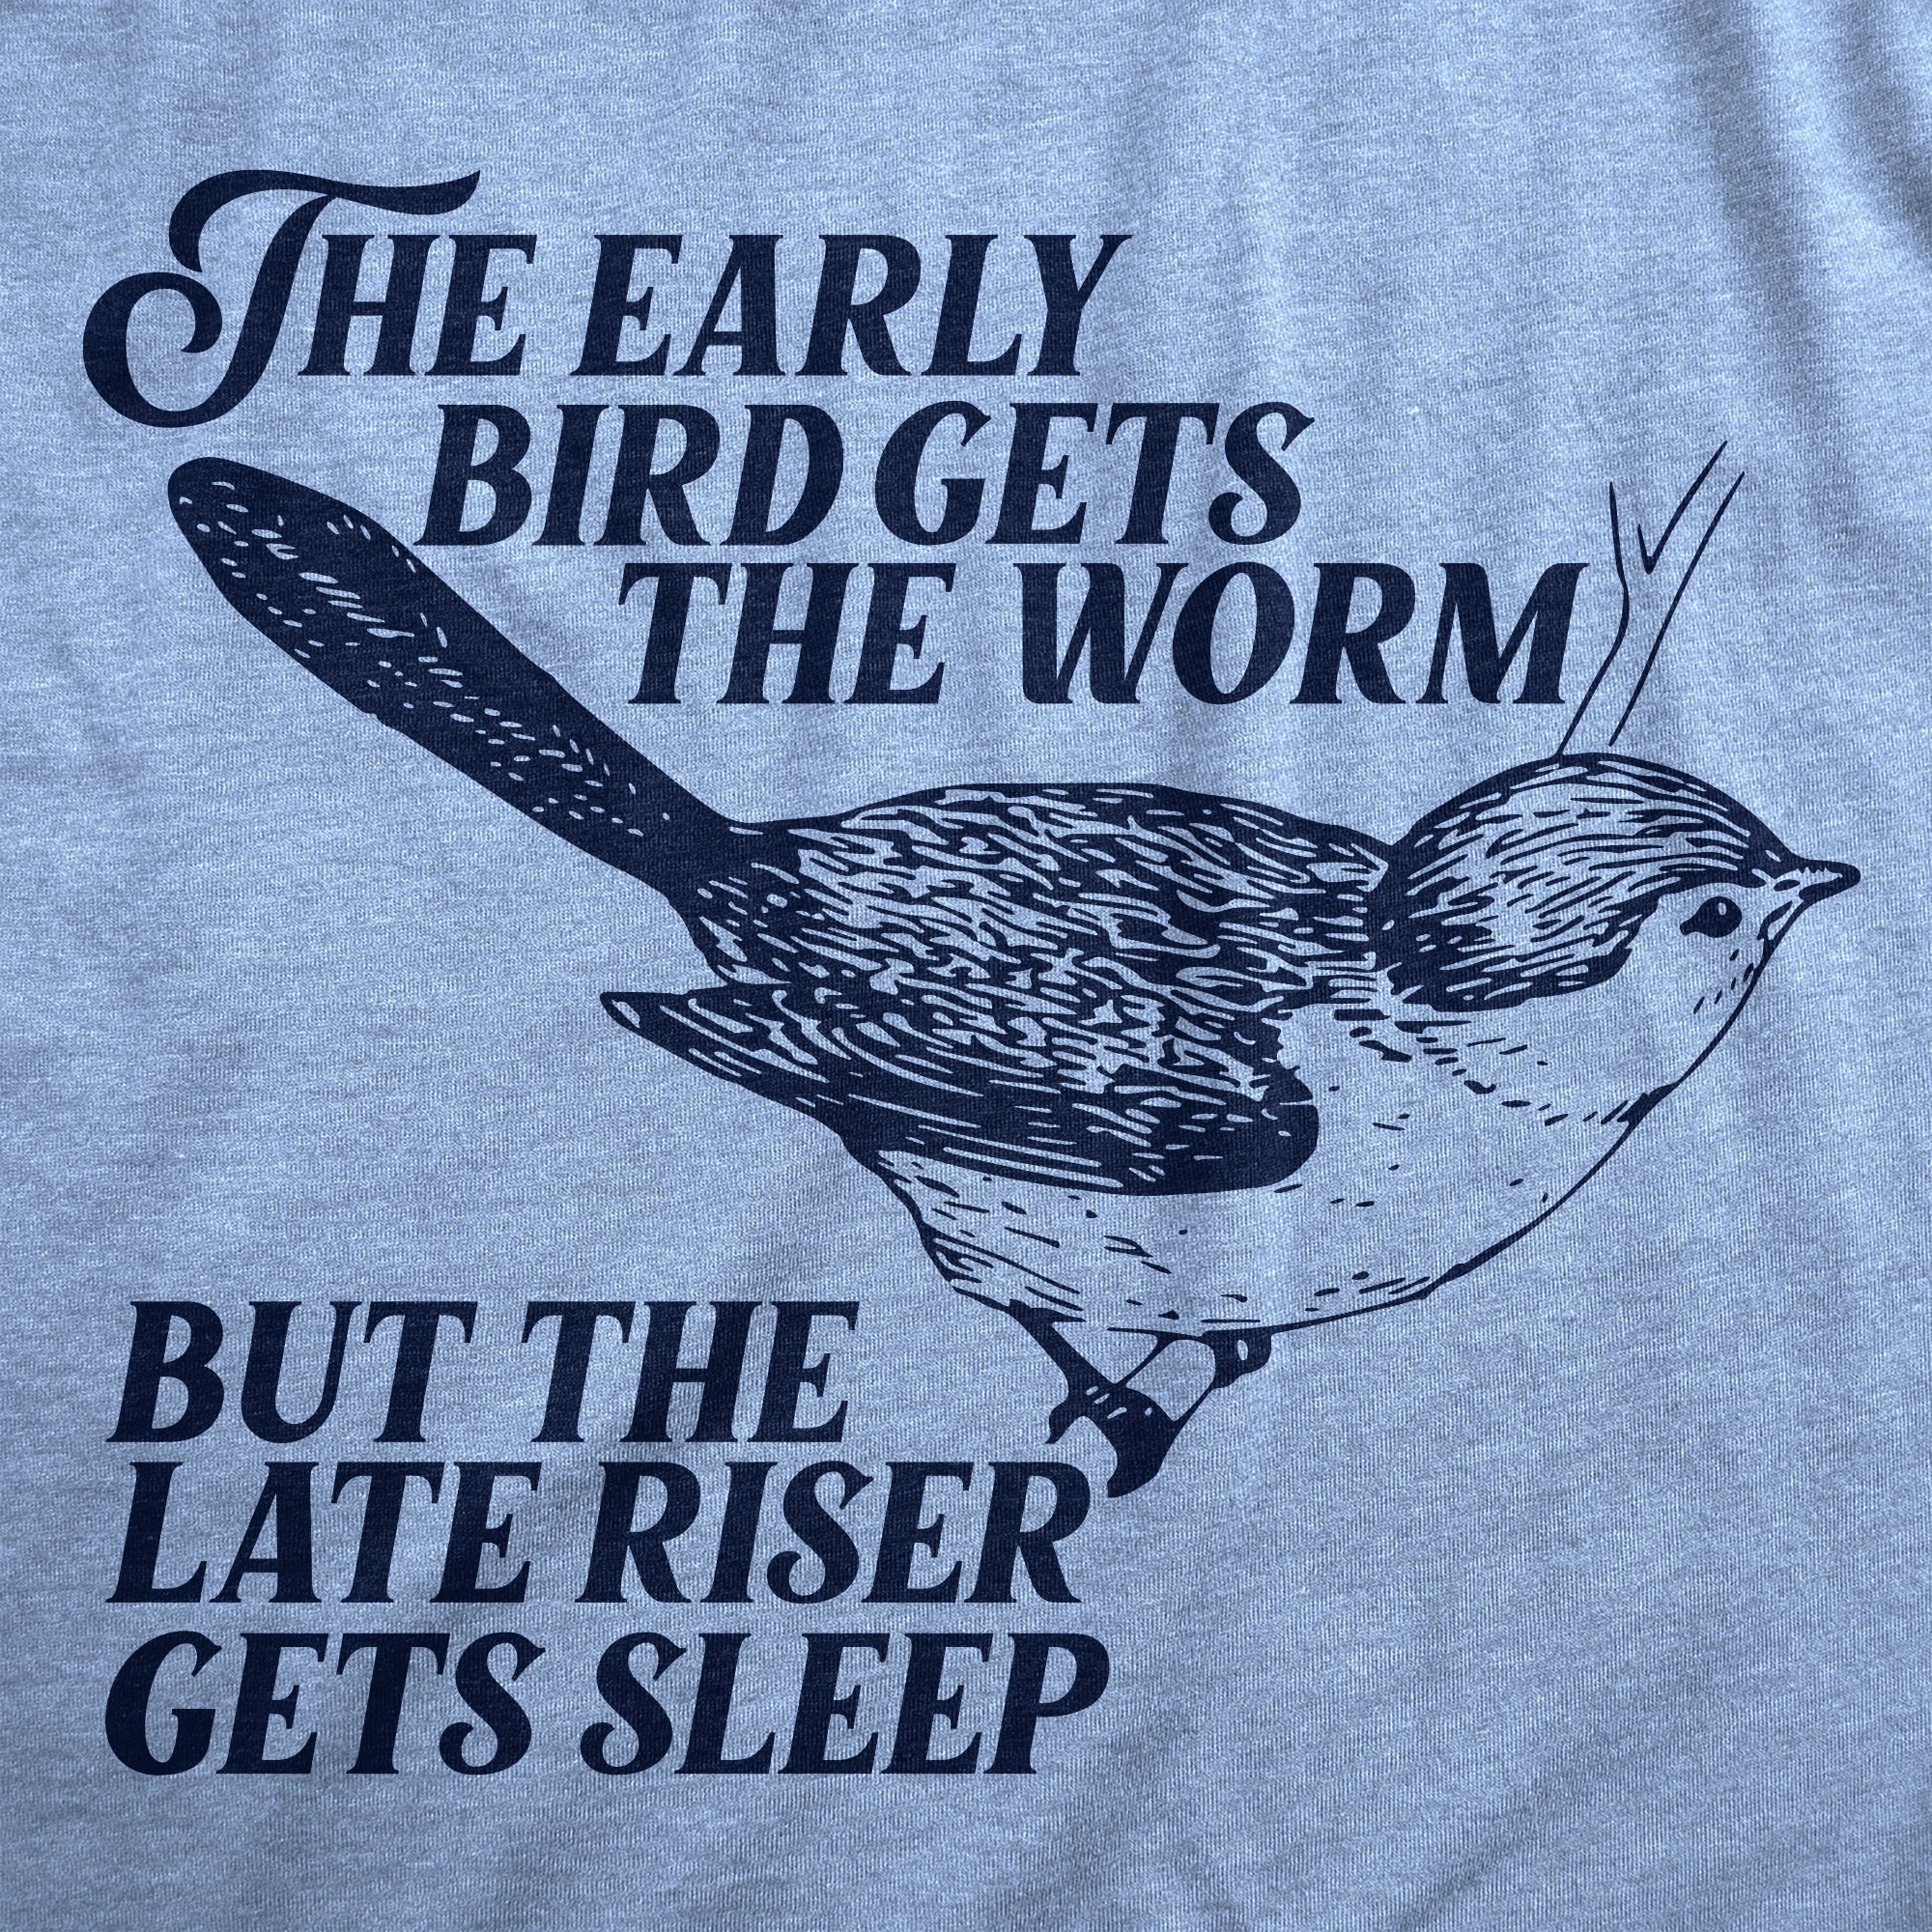 Funny Light Heather Blue - BIRD The Early Bird Gets The Worm But The Late Riser Gets Sleep Womens T Shirt Nerdy Sarcastic Tee